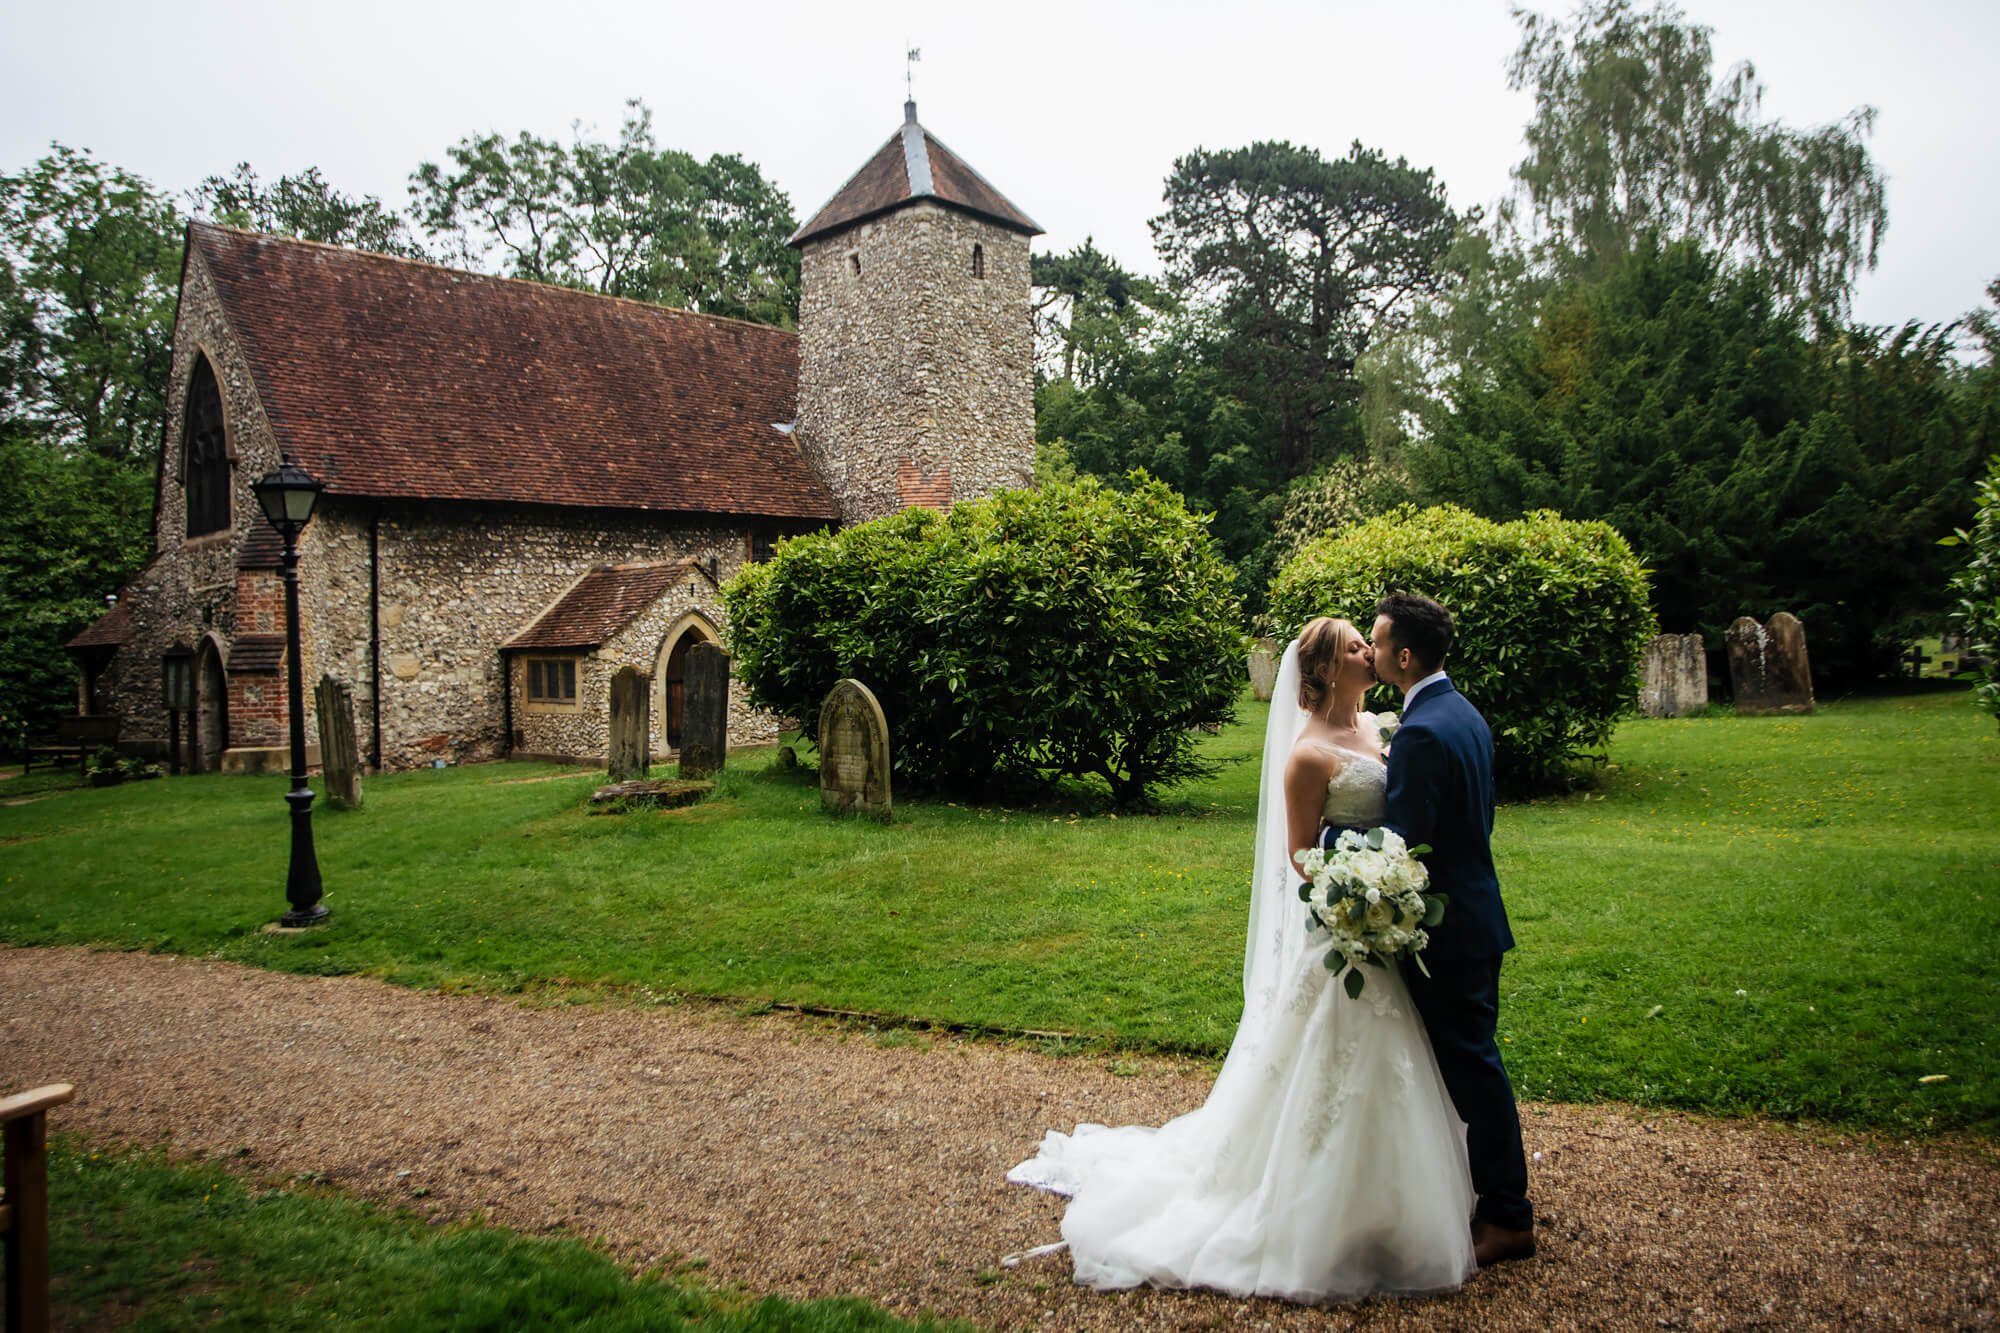 Bride and groom kiss on their wedding day in Kent